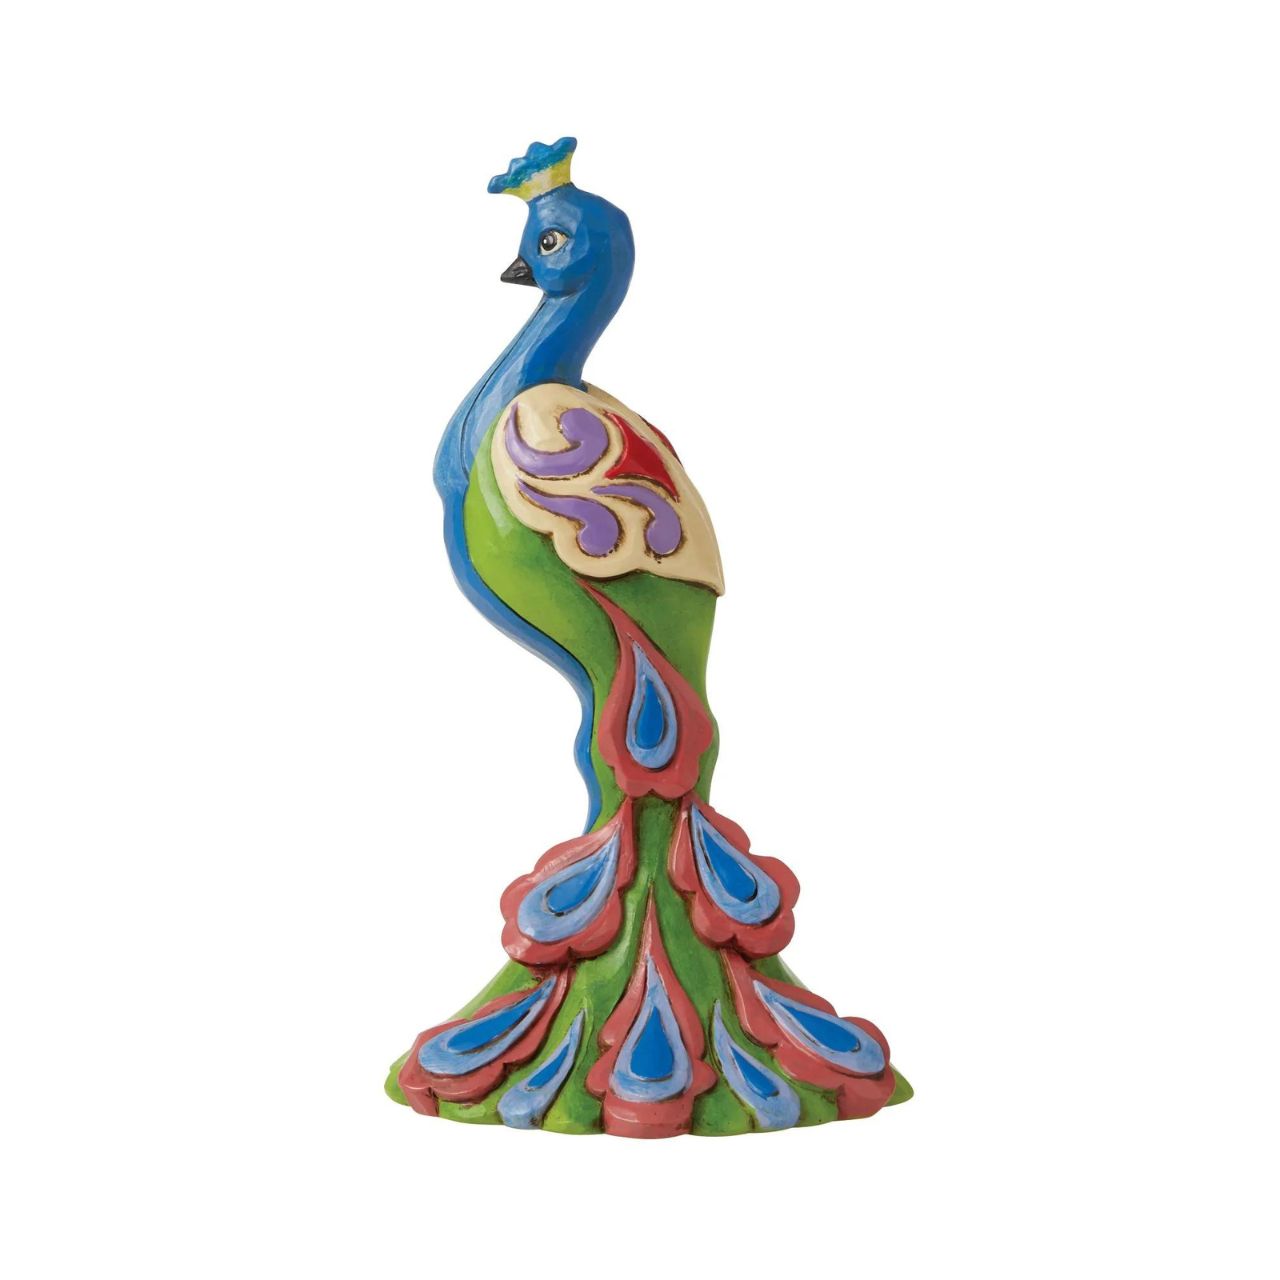 Peacock Mini Figurine  Handcrafted in breath-taking detail, this delightful Peacock Mini Figurine is beautifully decorated in Jim Shore's subtle combination of traditional quilt. These charming friends of the animal kingdom bring a small dose of delight into your home with sweet dispositions and delicate craftsmanship.